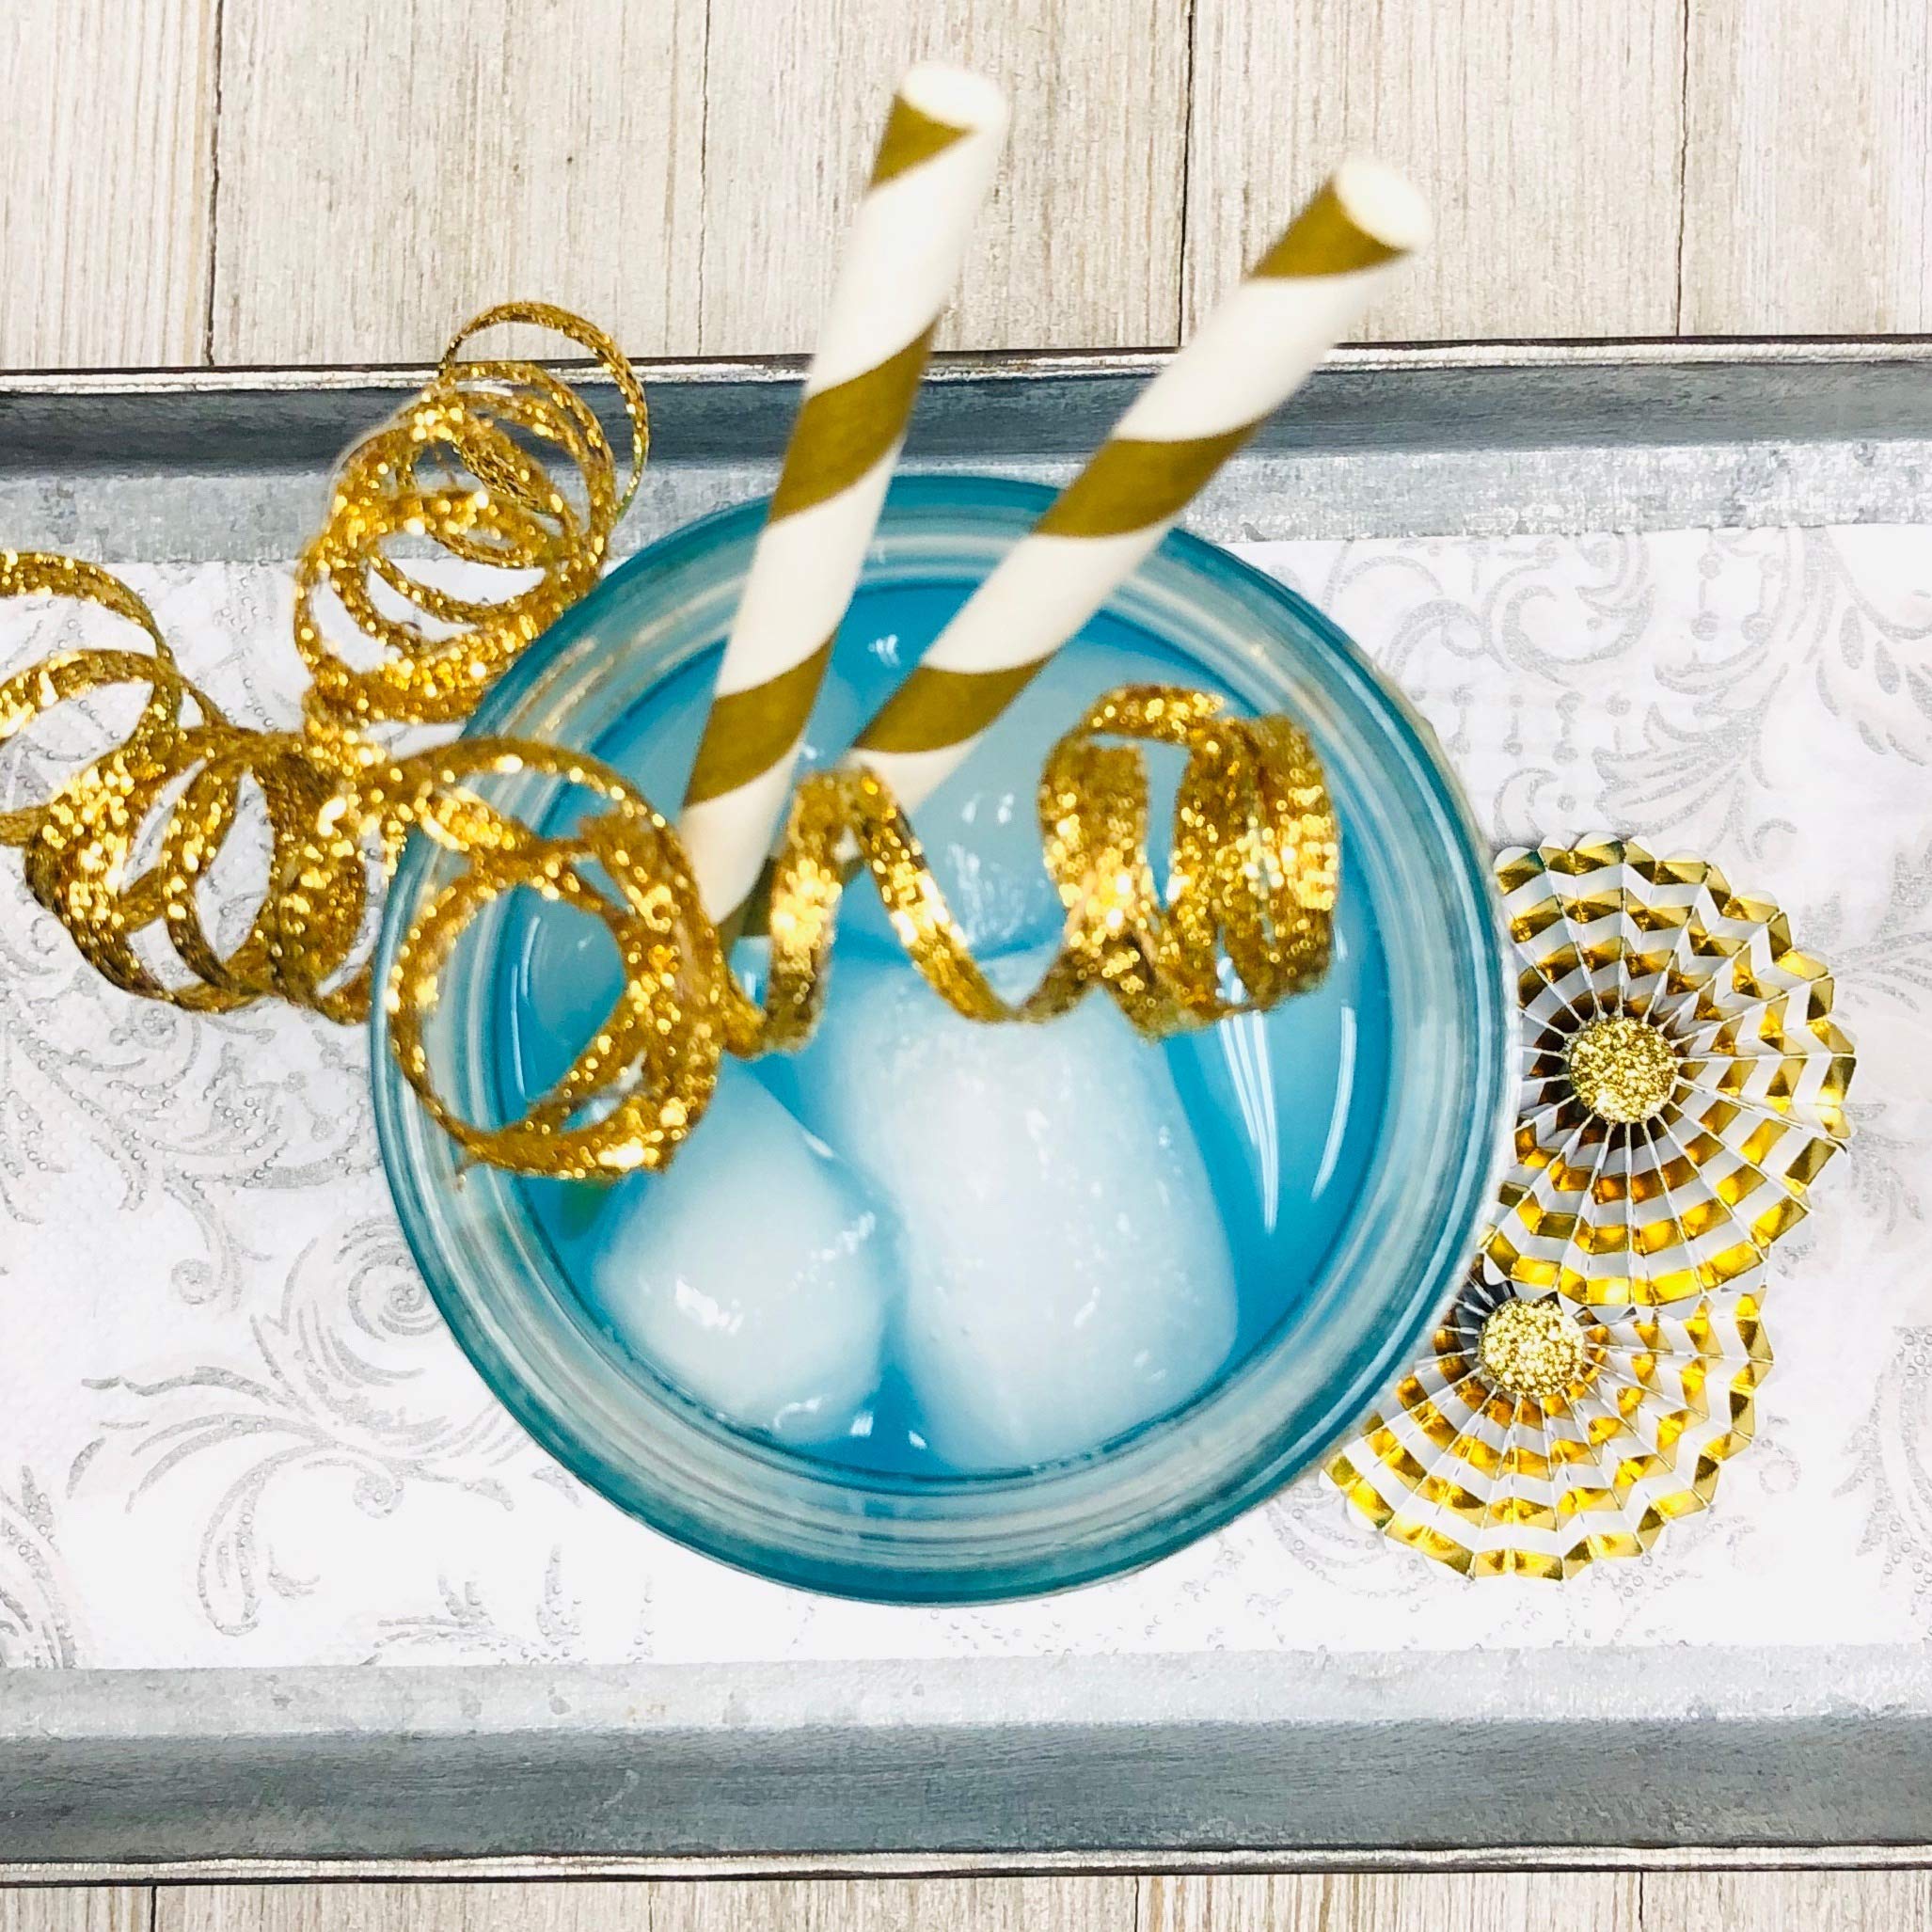 Striped Paper Straws - Gold White - Christmas Holiday Wedding Anniversary Supply - 7.75 Inches - 50 Pack - Outside the Box Papers Brand